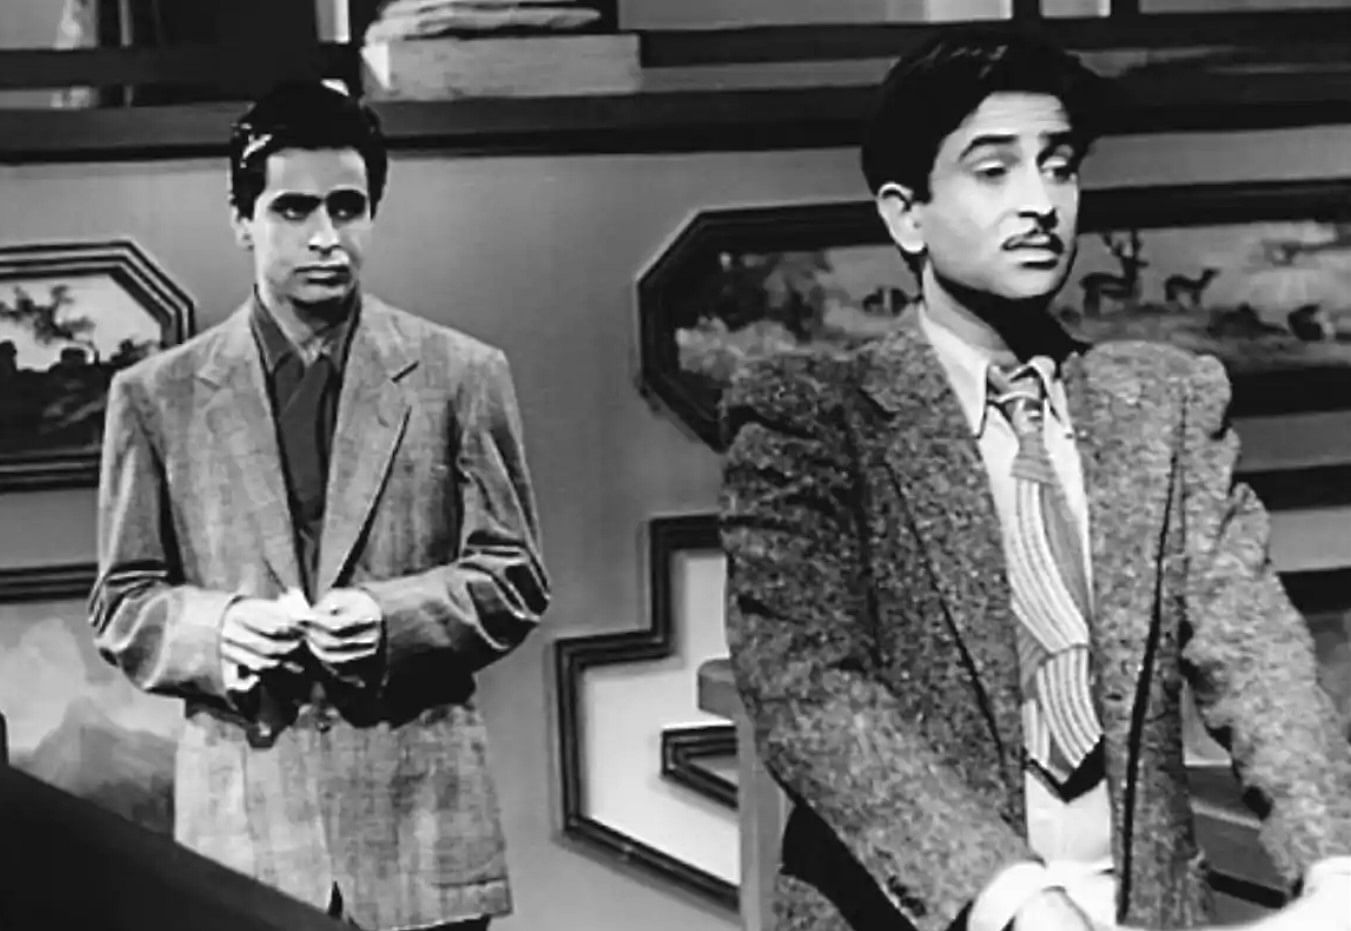 Dilip Kumar (left) and Raj Kapoor during their earlier days in the industry.